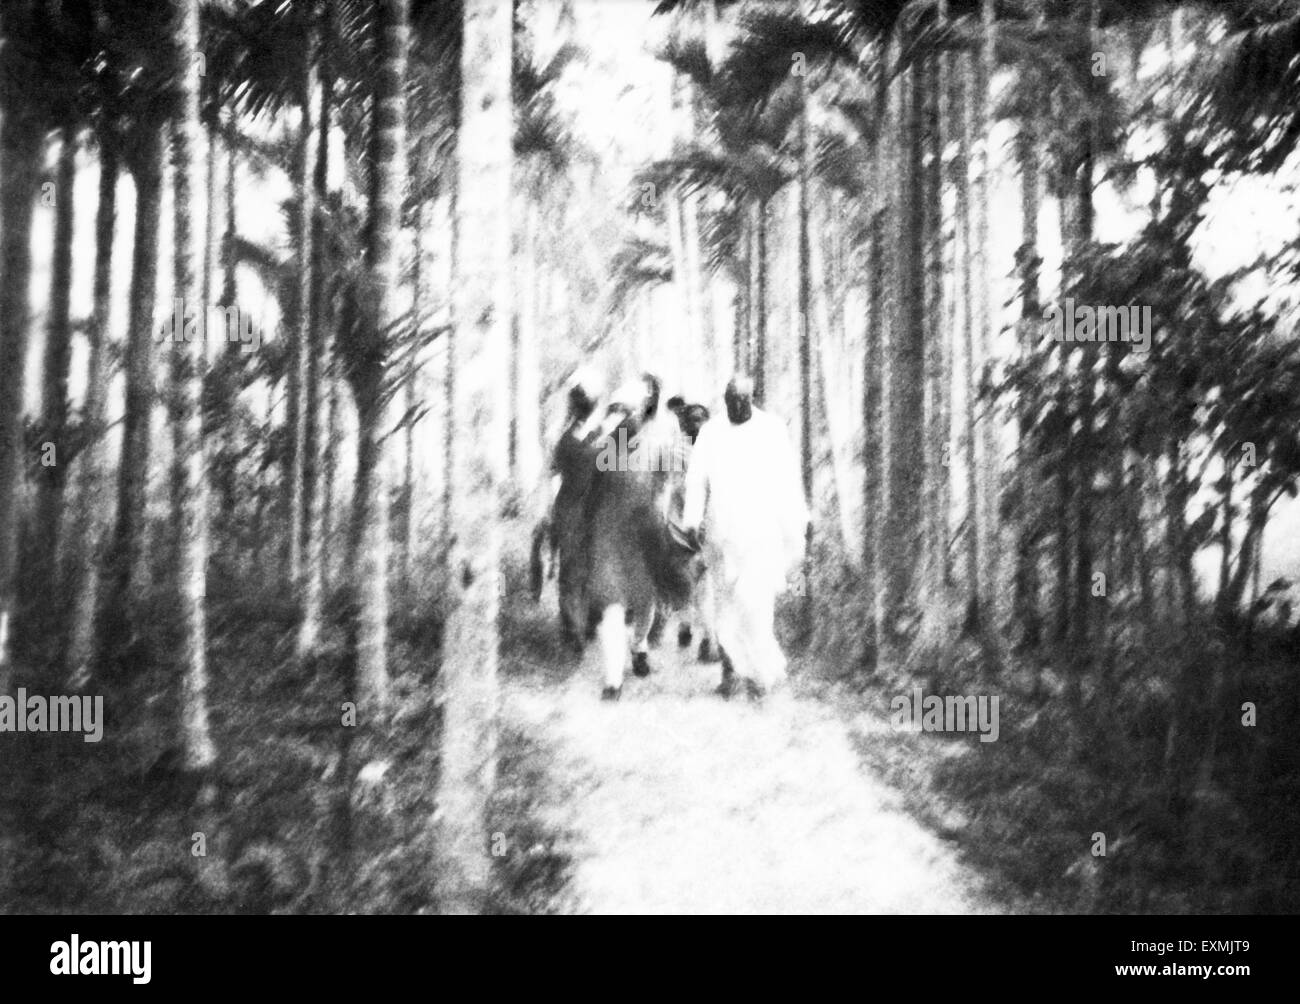 People walking in a forest blur photograph ; 1946 ; India NO MR Stock Photo